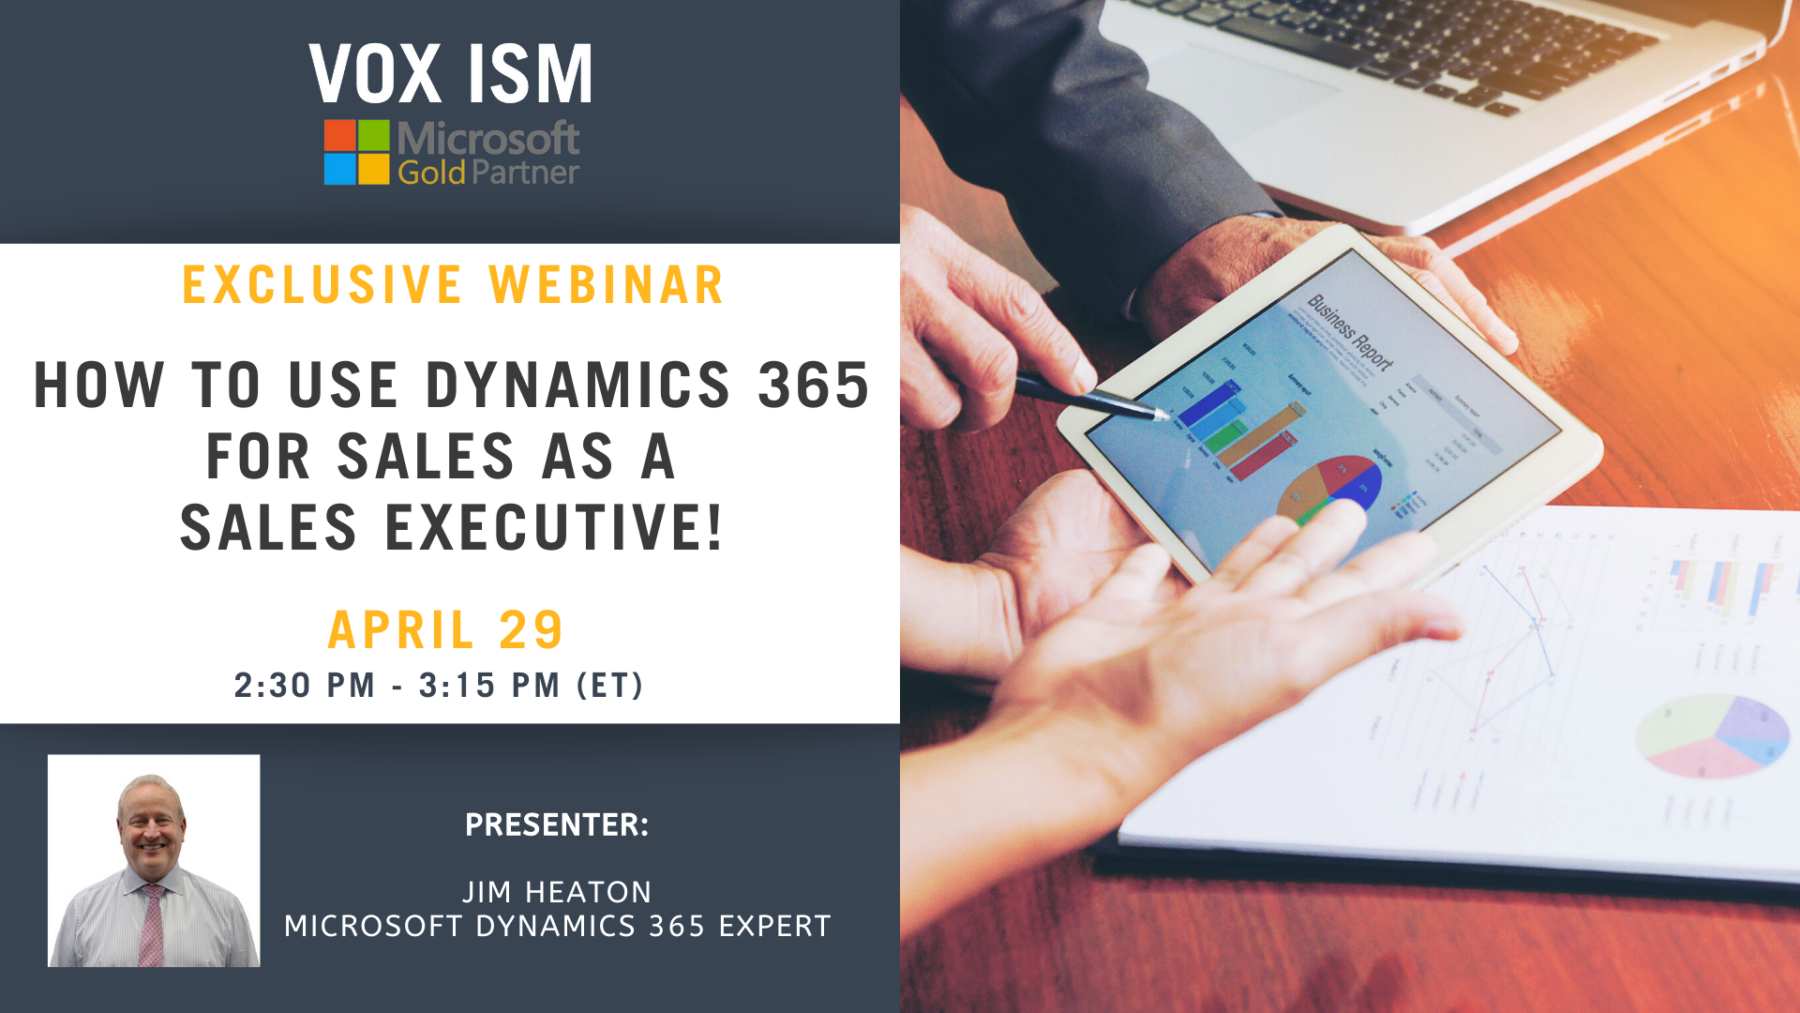 How to use Dynamics 365 for Sales as a sales executive! VOX ISM